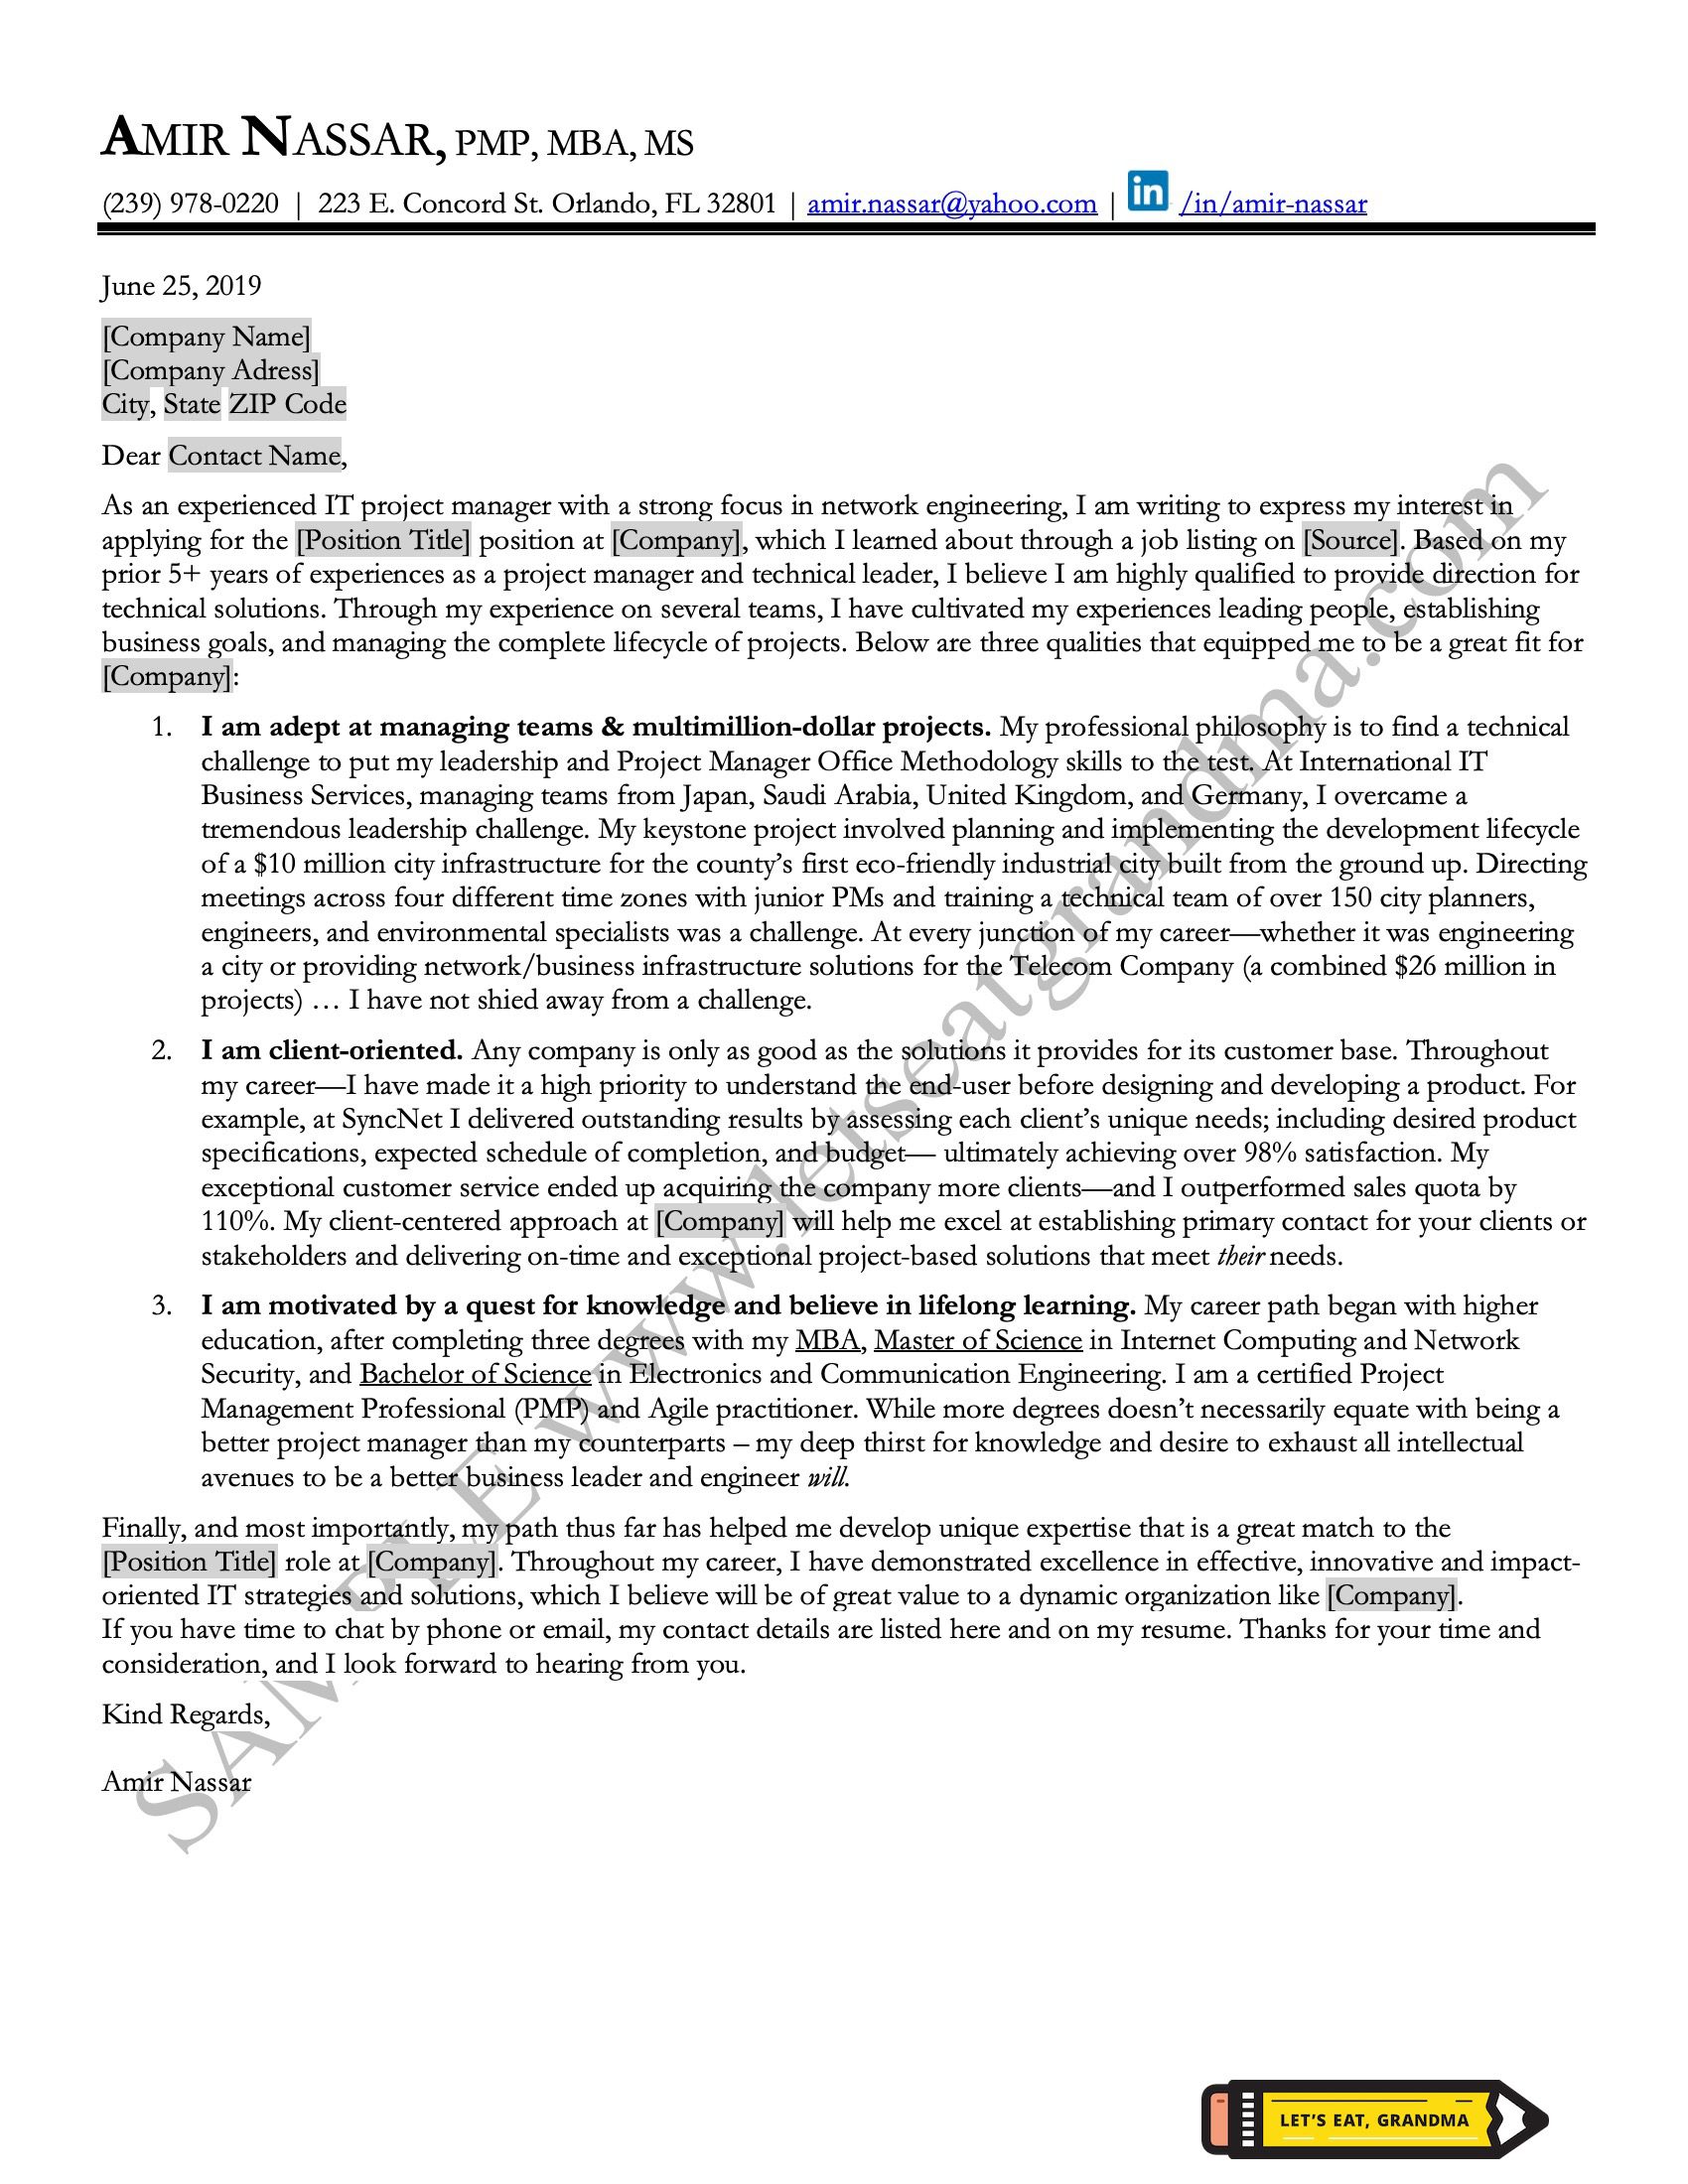 Excellent Cover Letter Templates from www.letseatgrandma.com